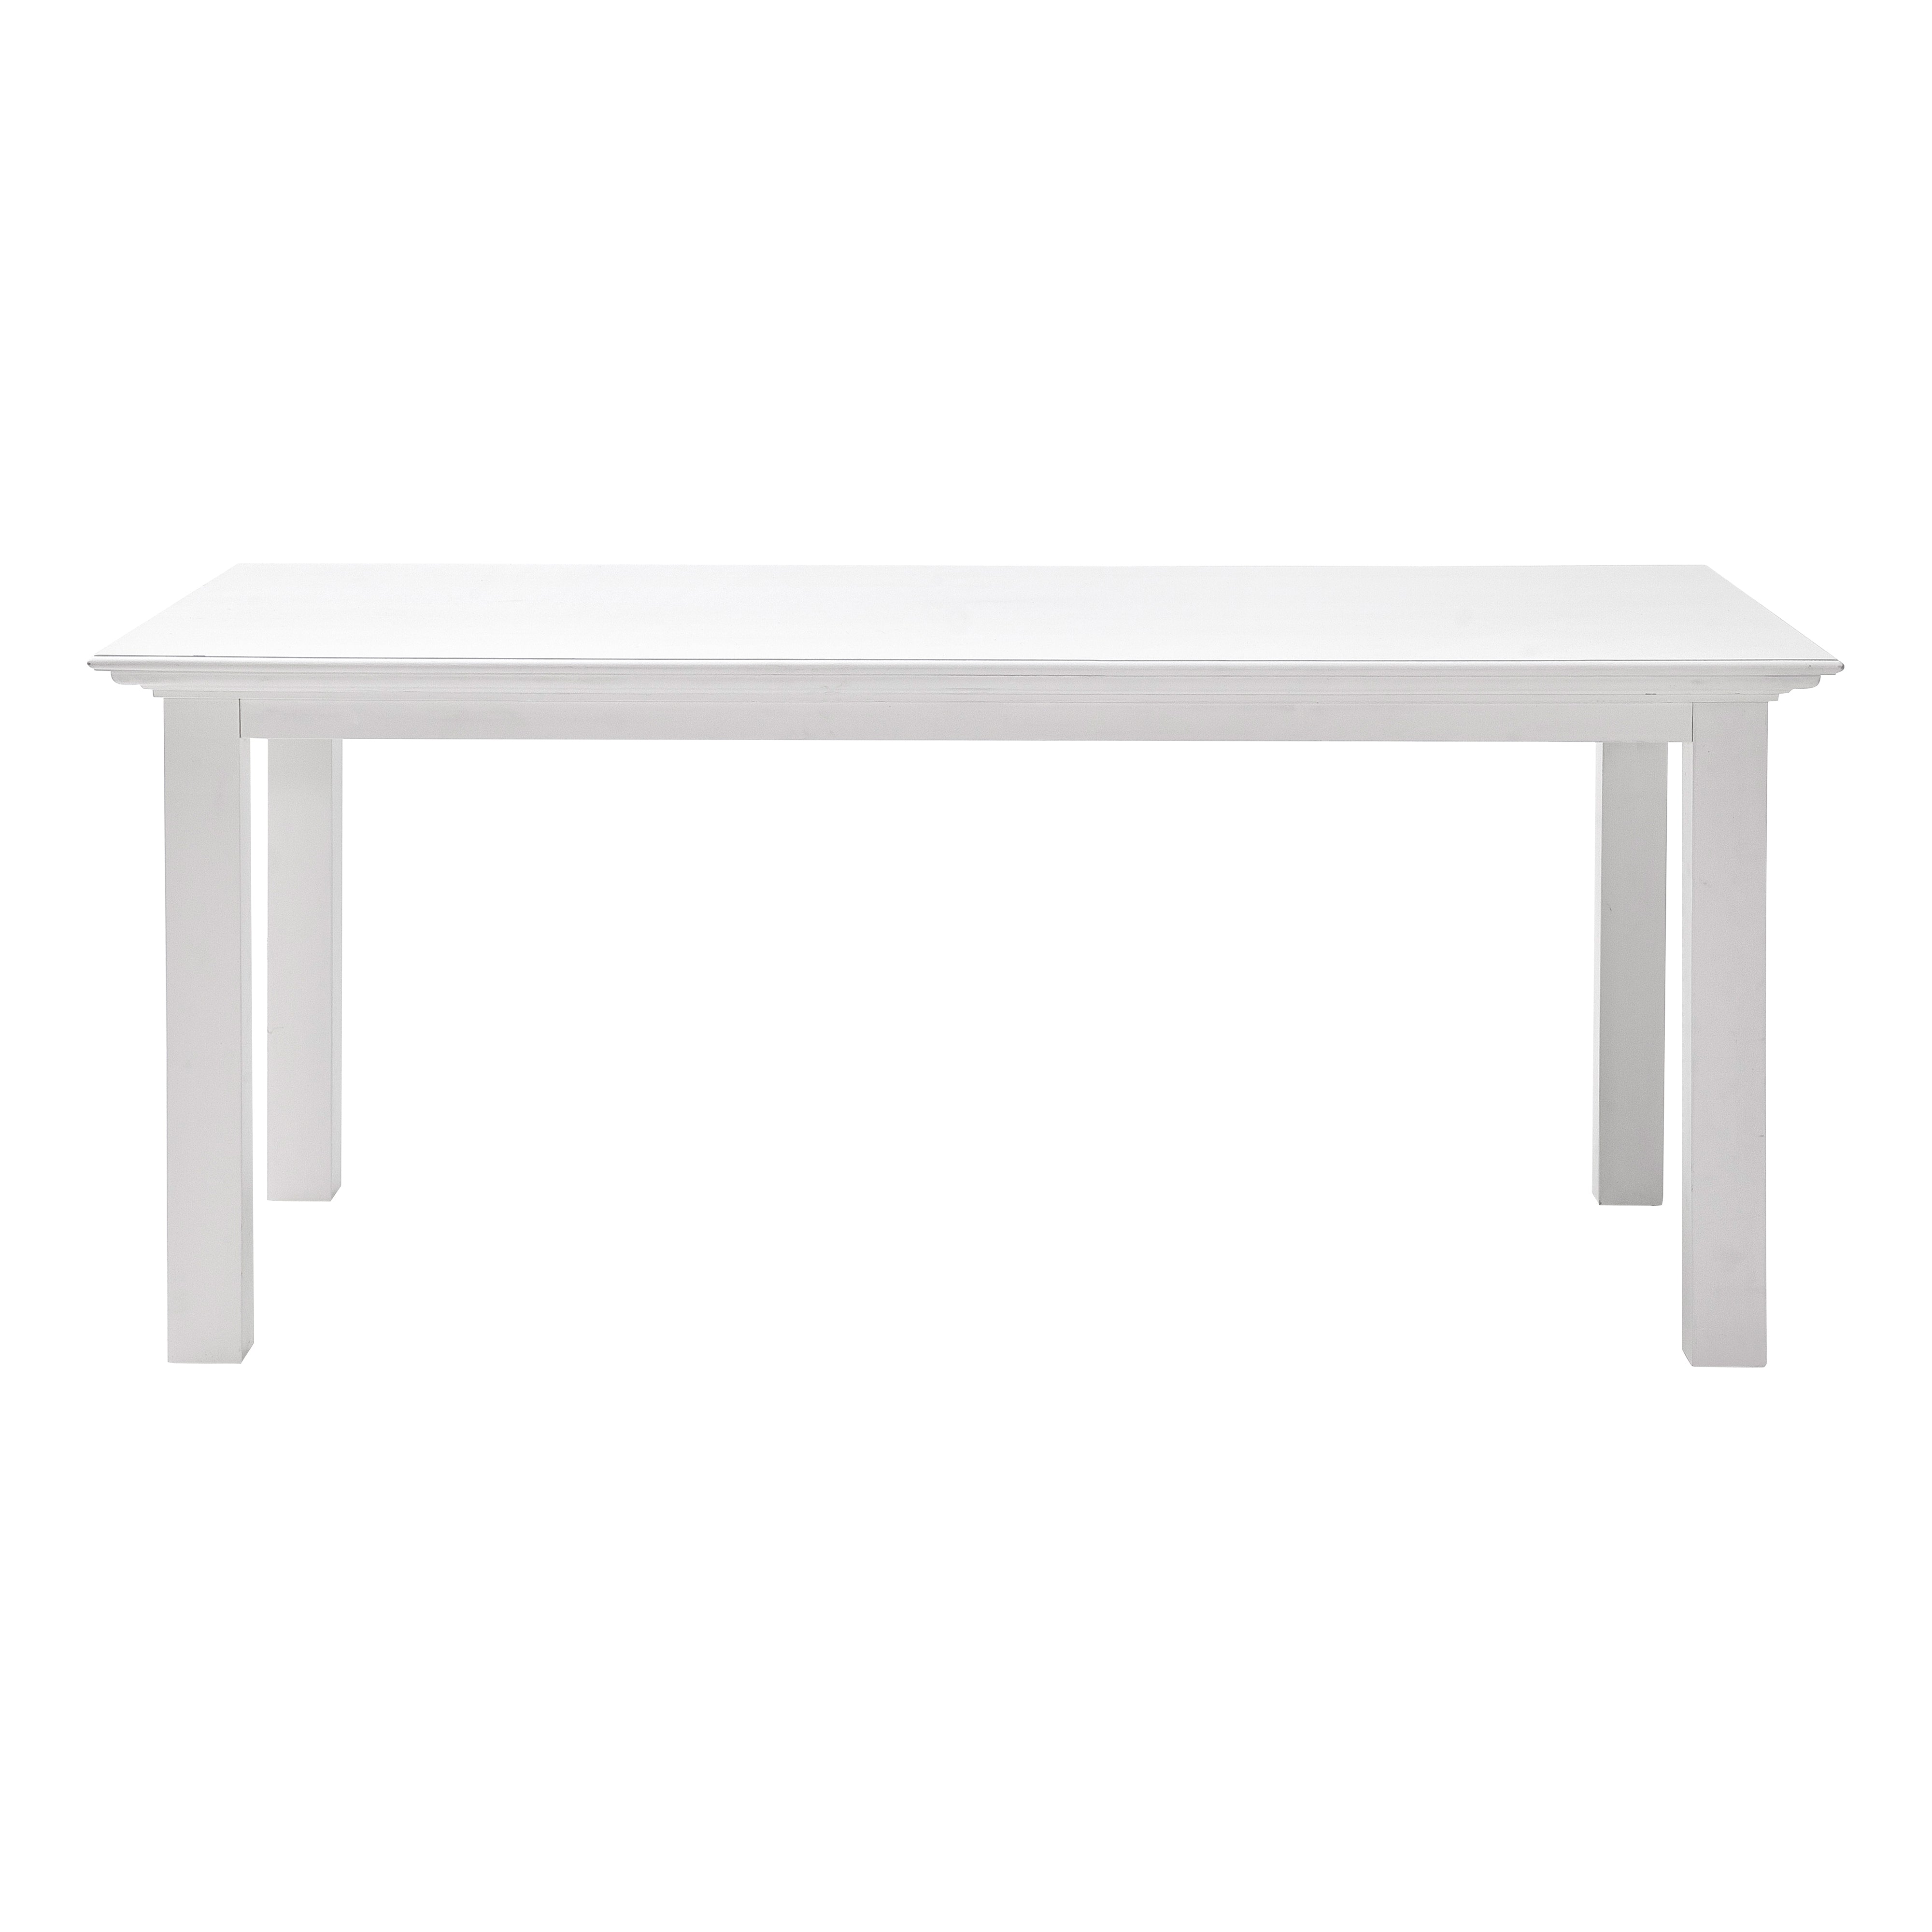 HALIFAX Dining Table 200x100 Front View